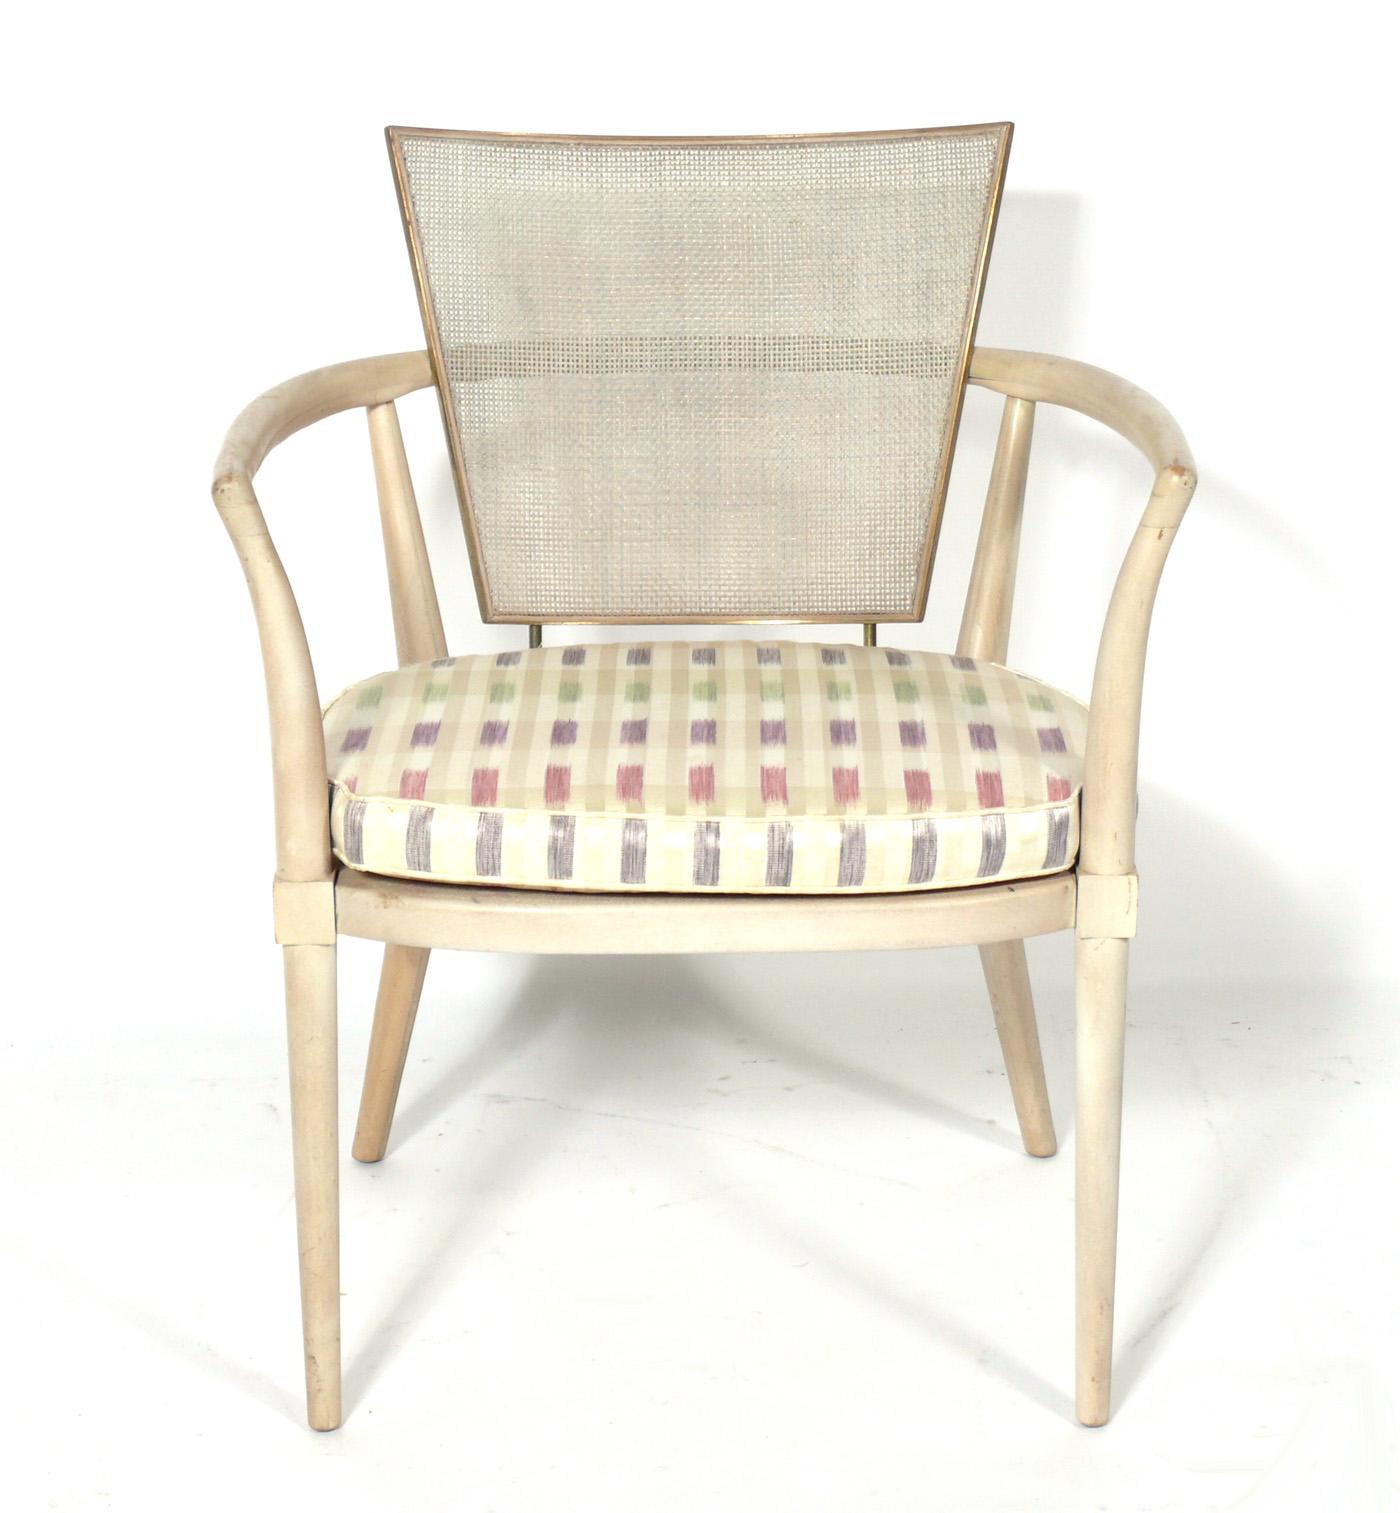 Elegant caned back lime washed wood lounge chairs, designed by Bert England for Johnson Furniture, American, circa 1960s. They are currently being reupholstered and can be completed in your fabric. Simply send us 1.5 yards of your fabric after